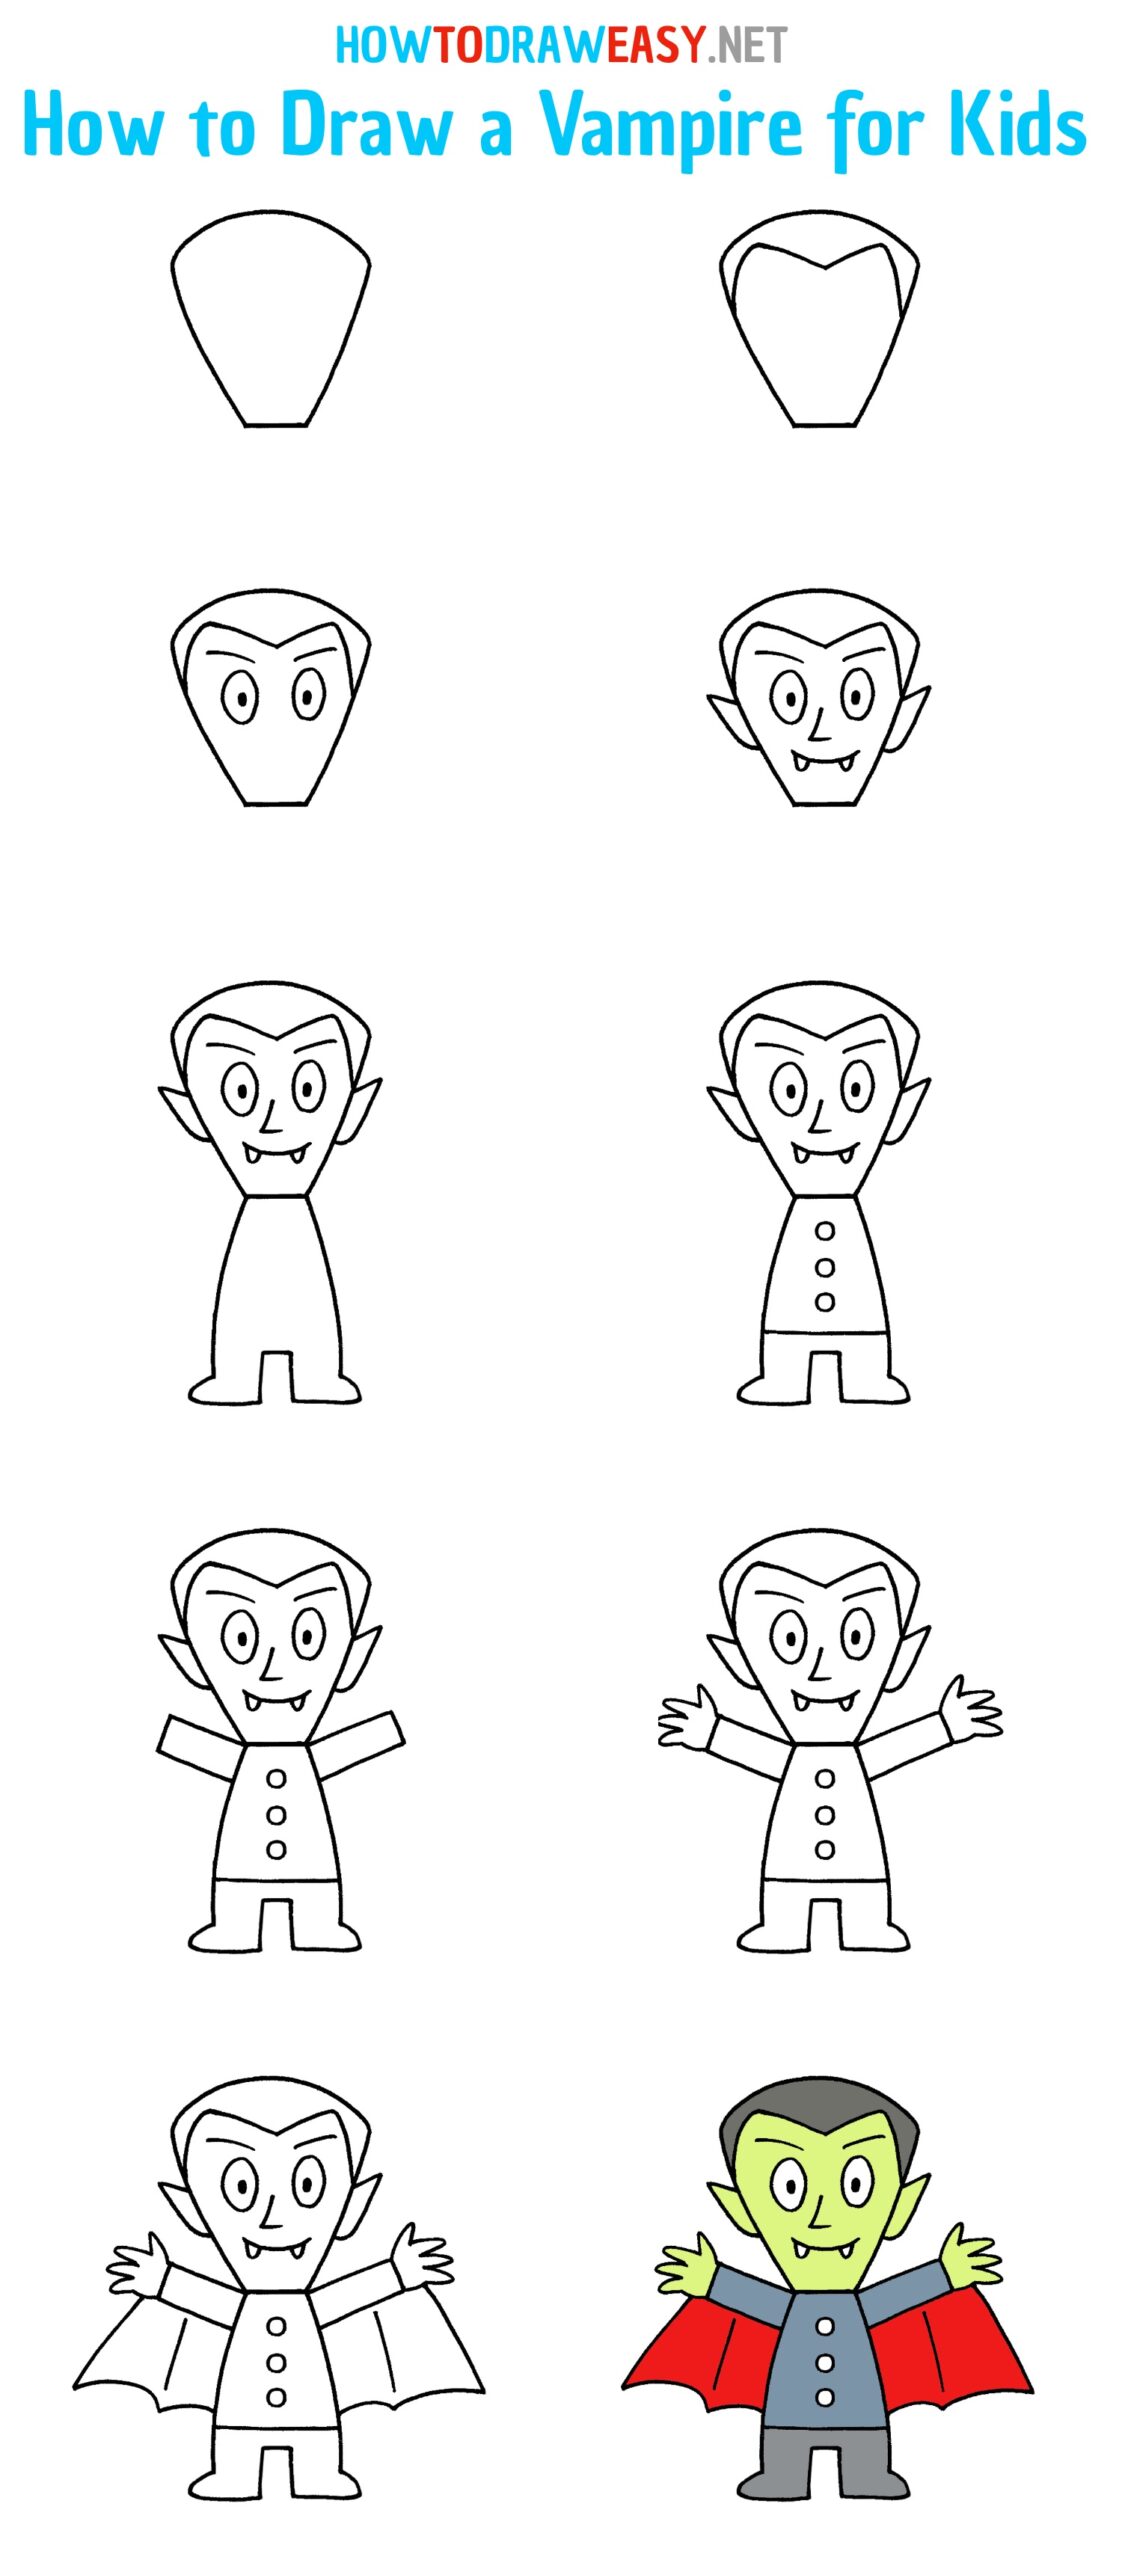 How to Draw a Vampire Step by Step